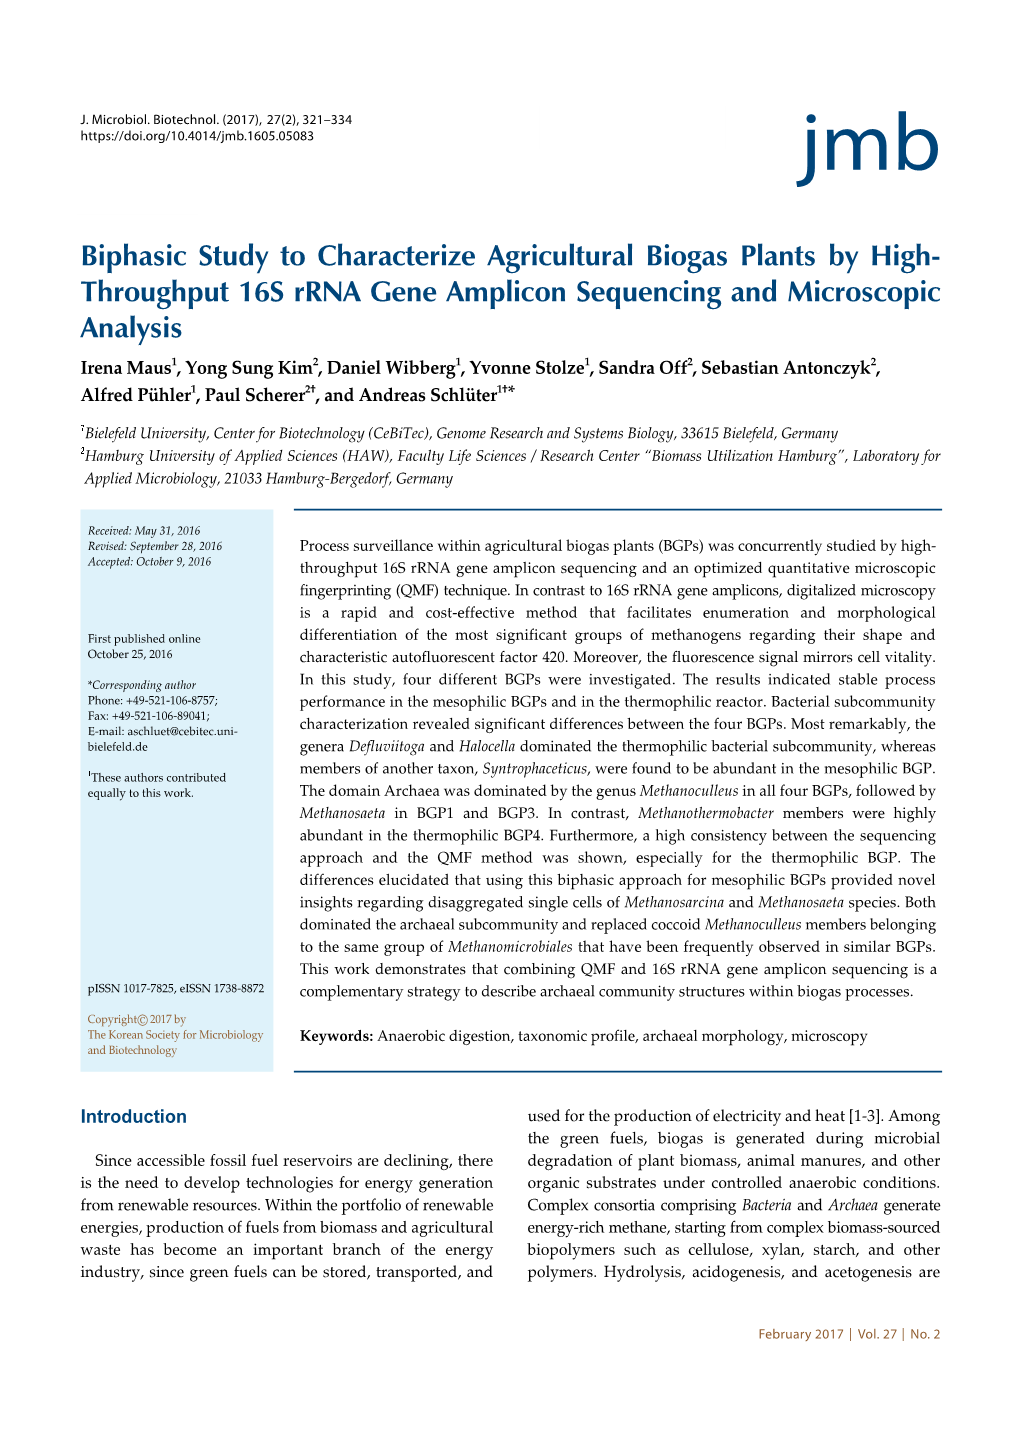 Biphasic Study to Characterize Agricultural Biogas Plants by High